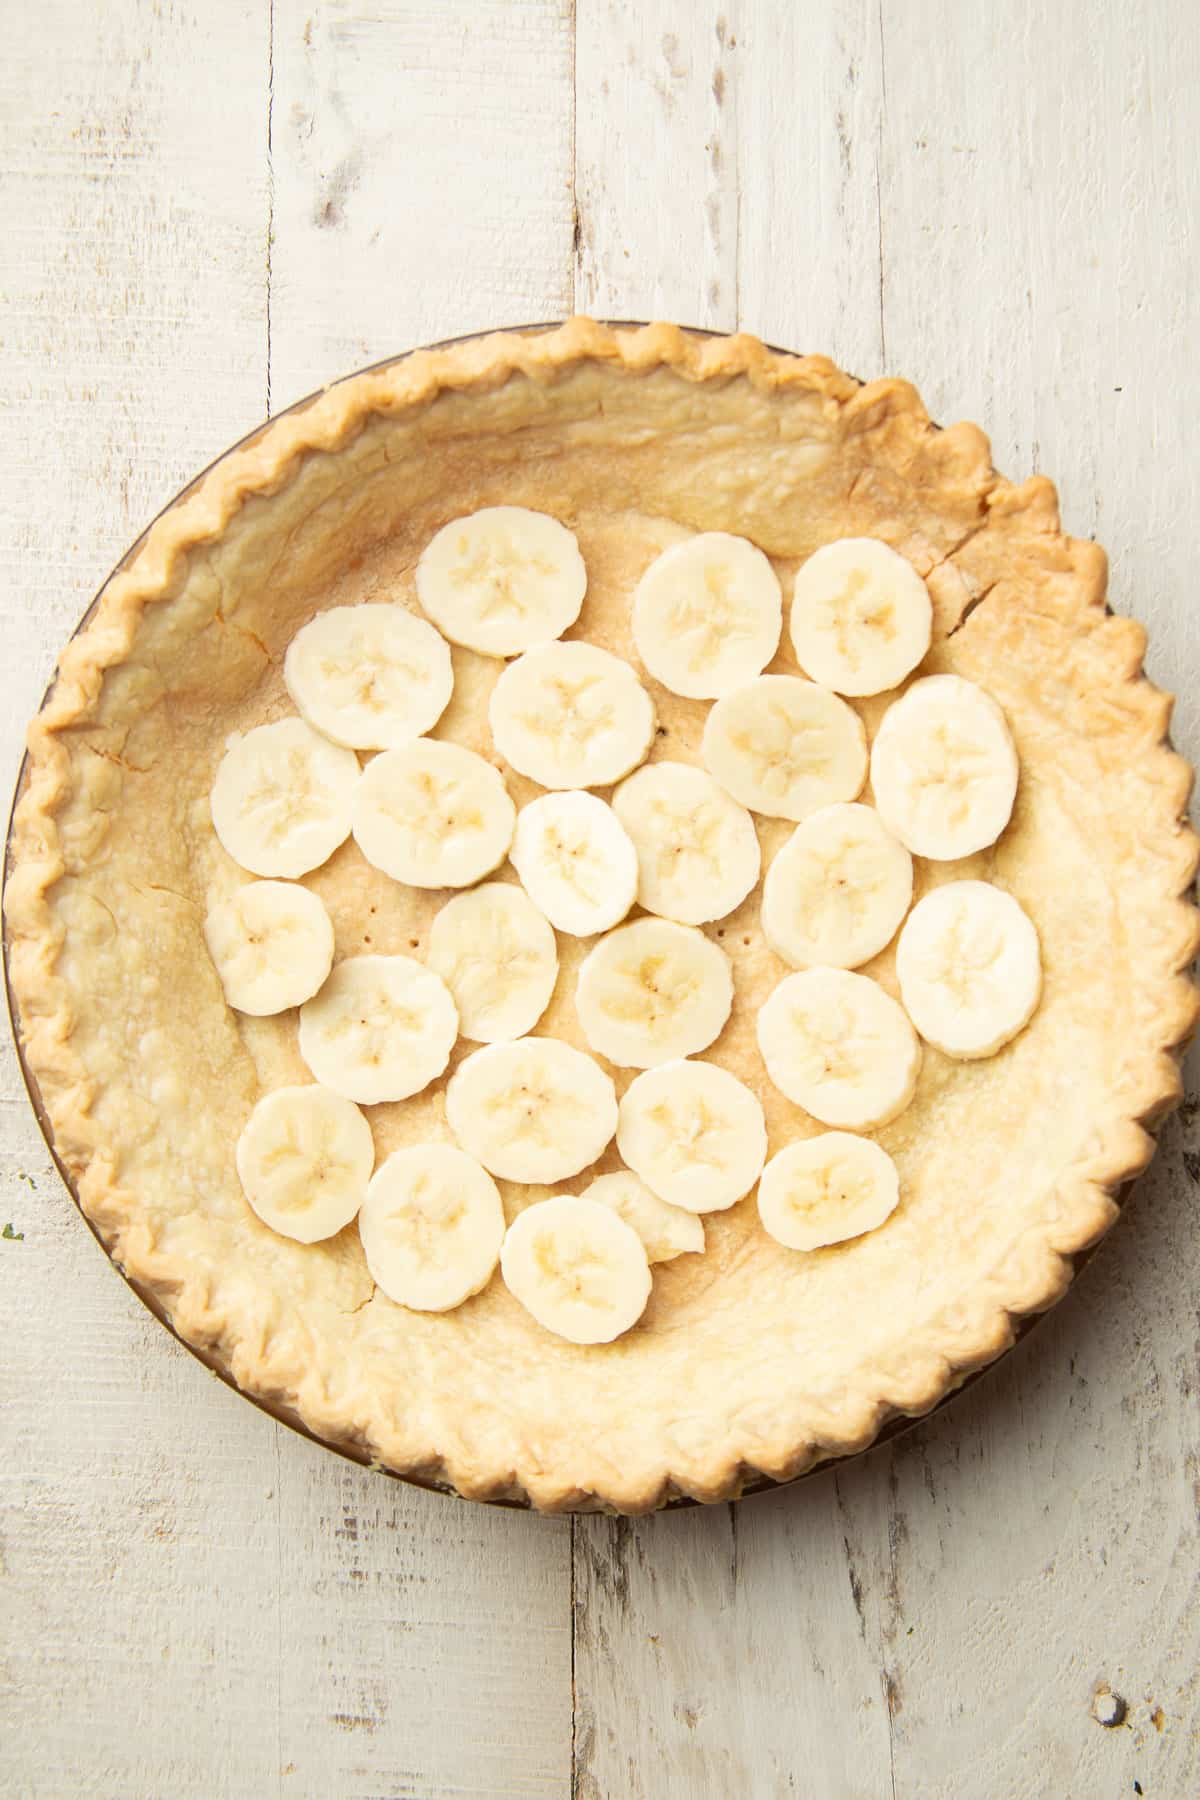 Banana slices arranged in a pie crust.